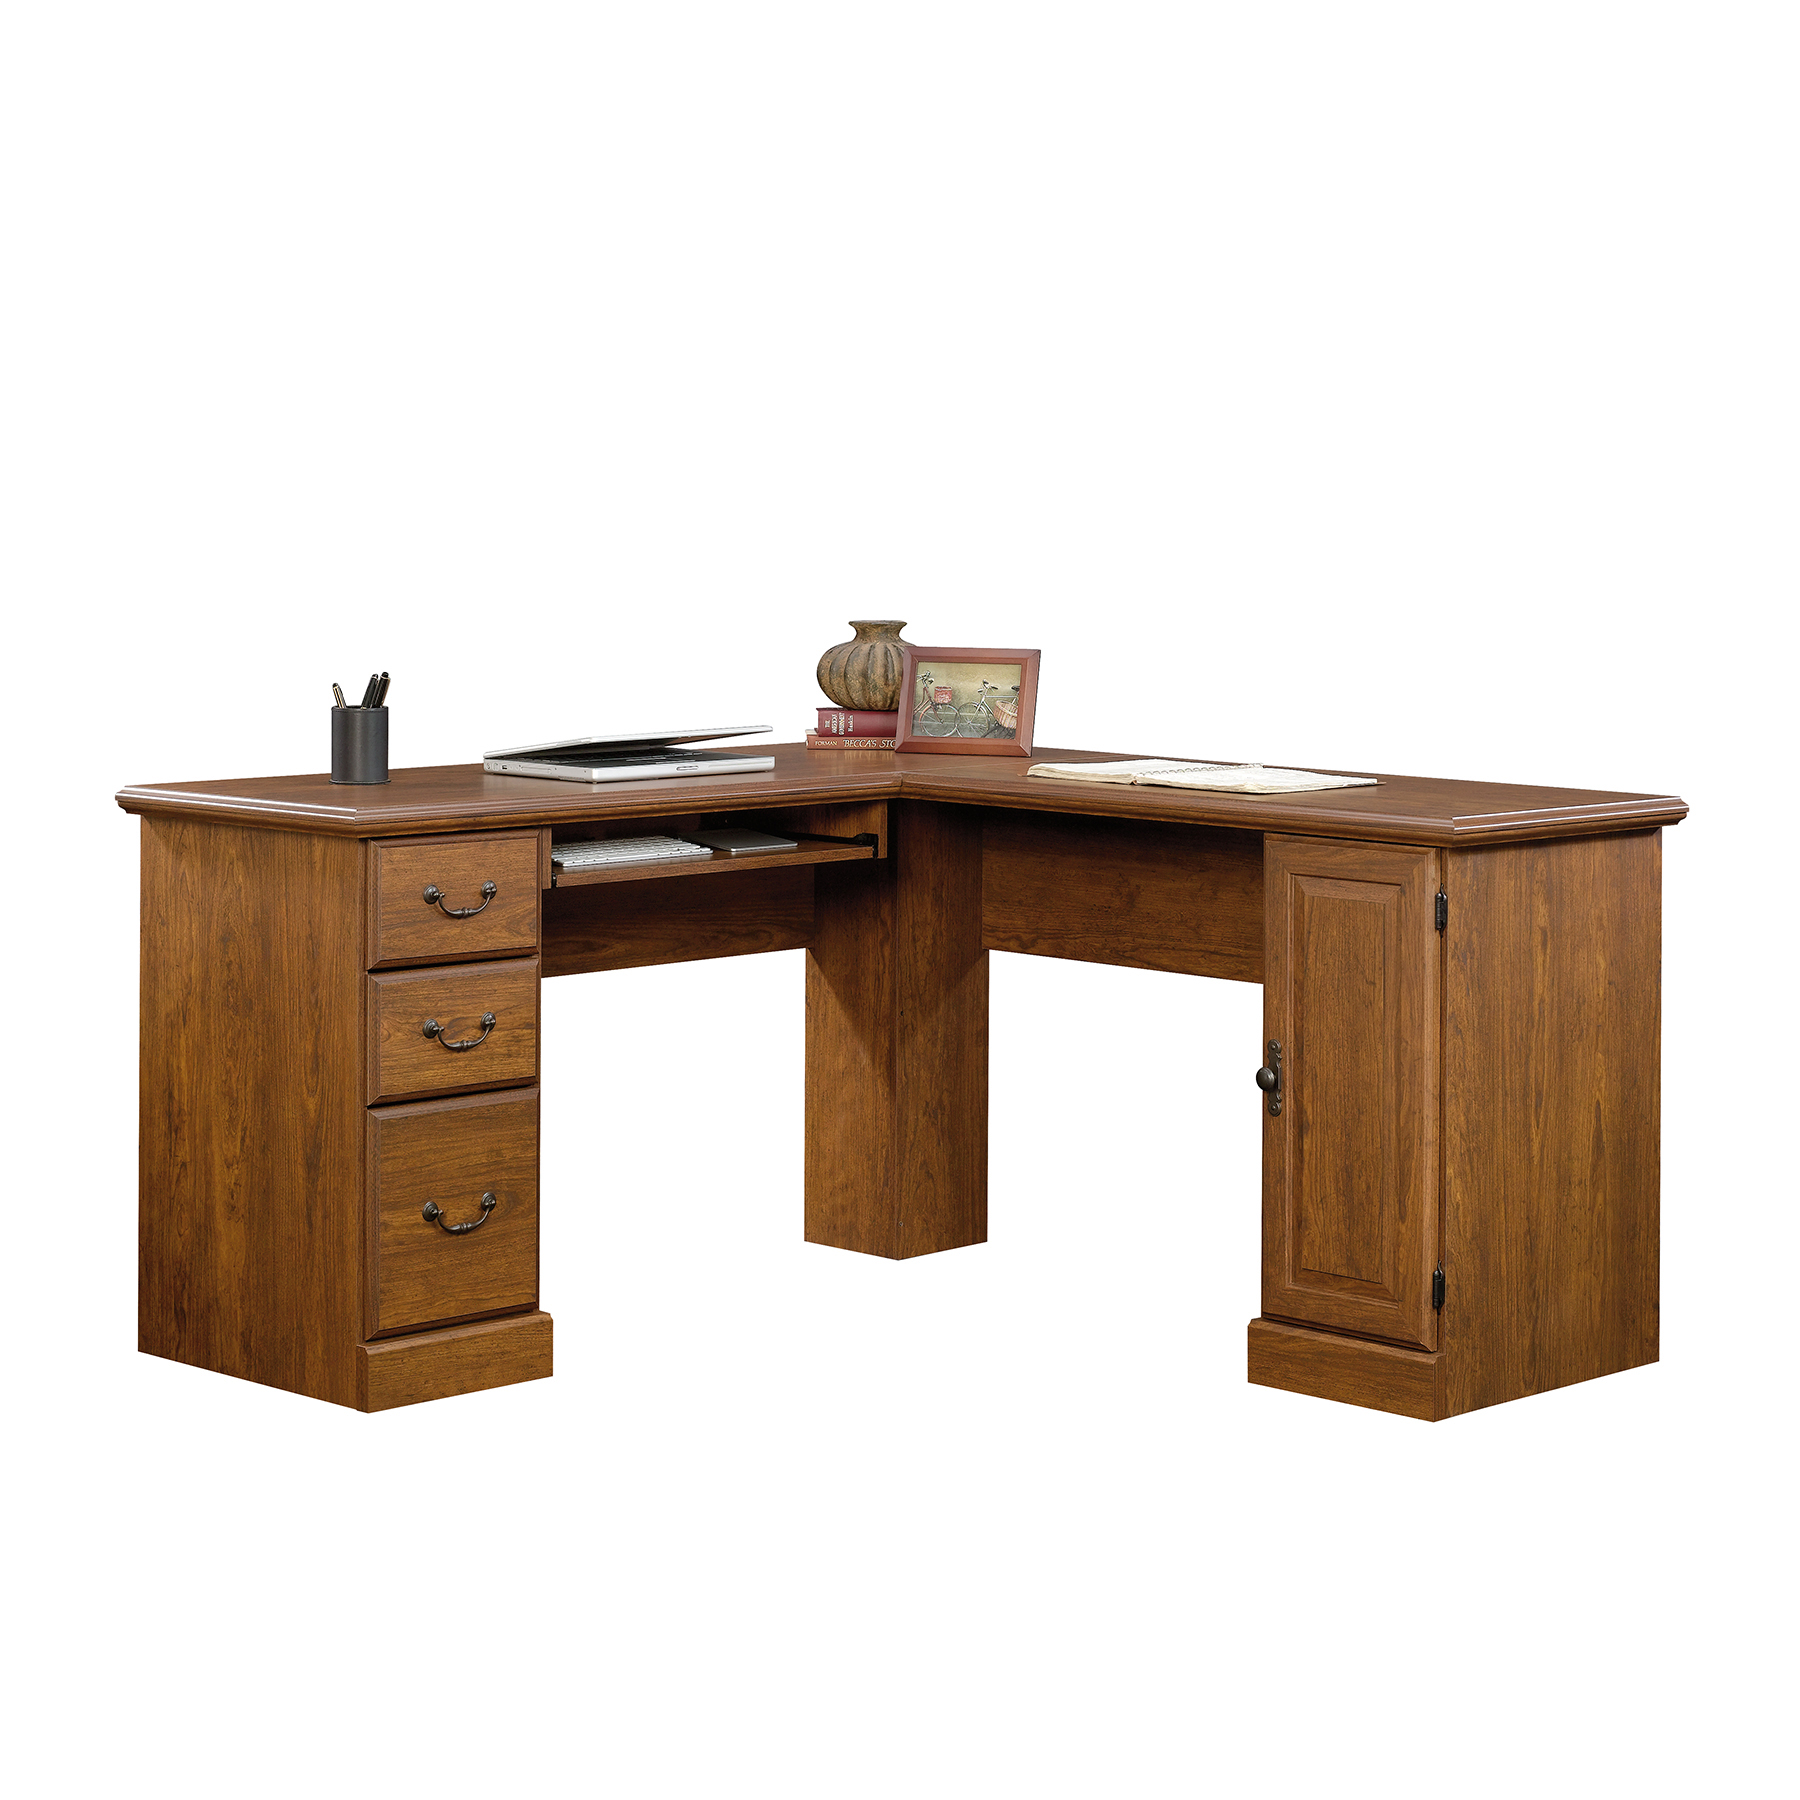 UPC 042666021982 product image for Sauder Round Traditional Table, Brown | upcitemdb.com